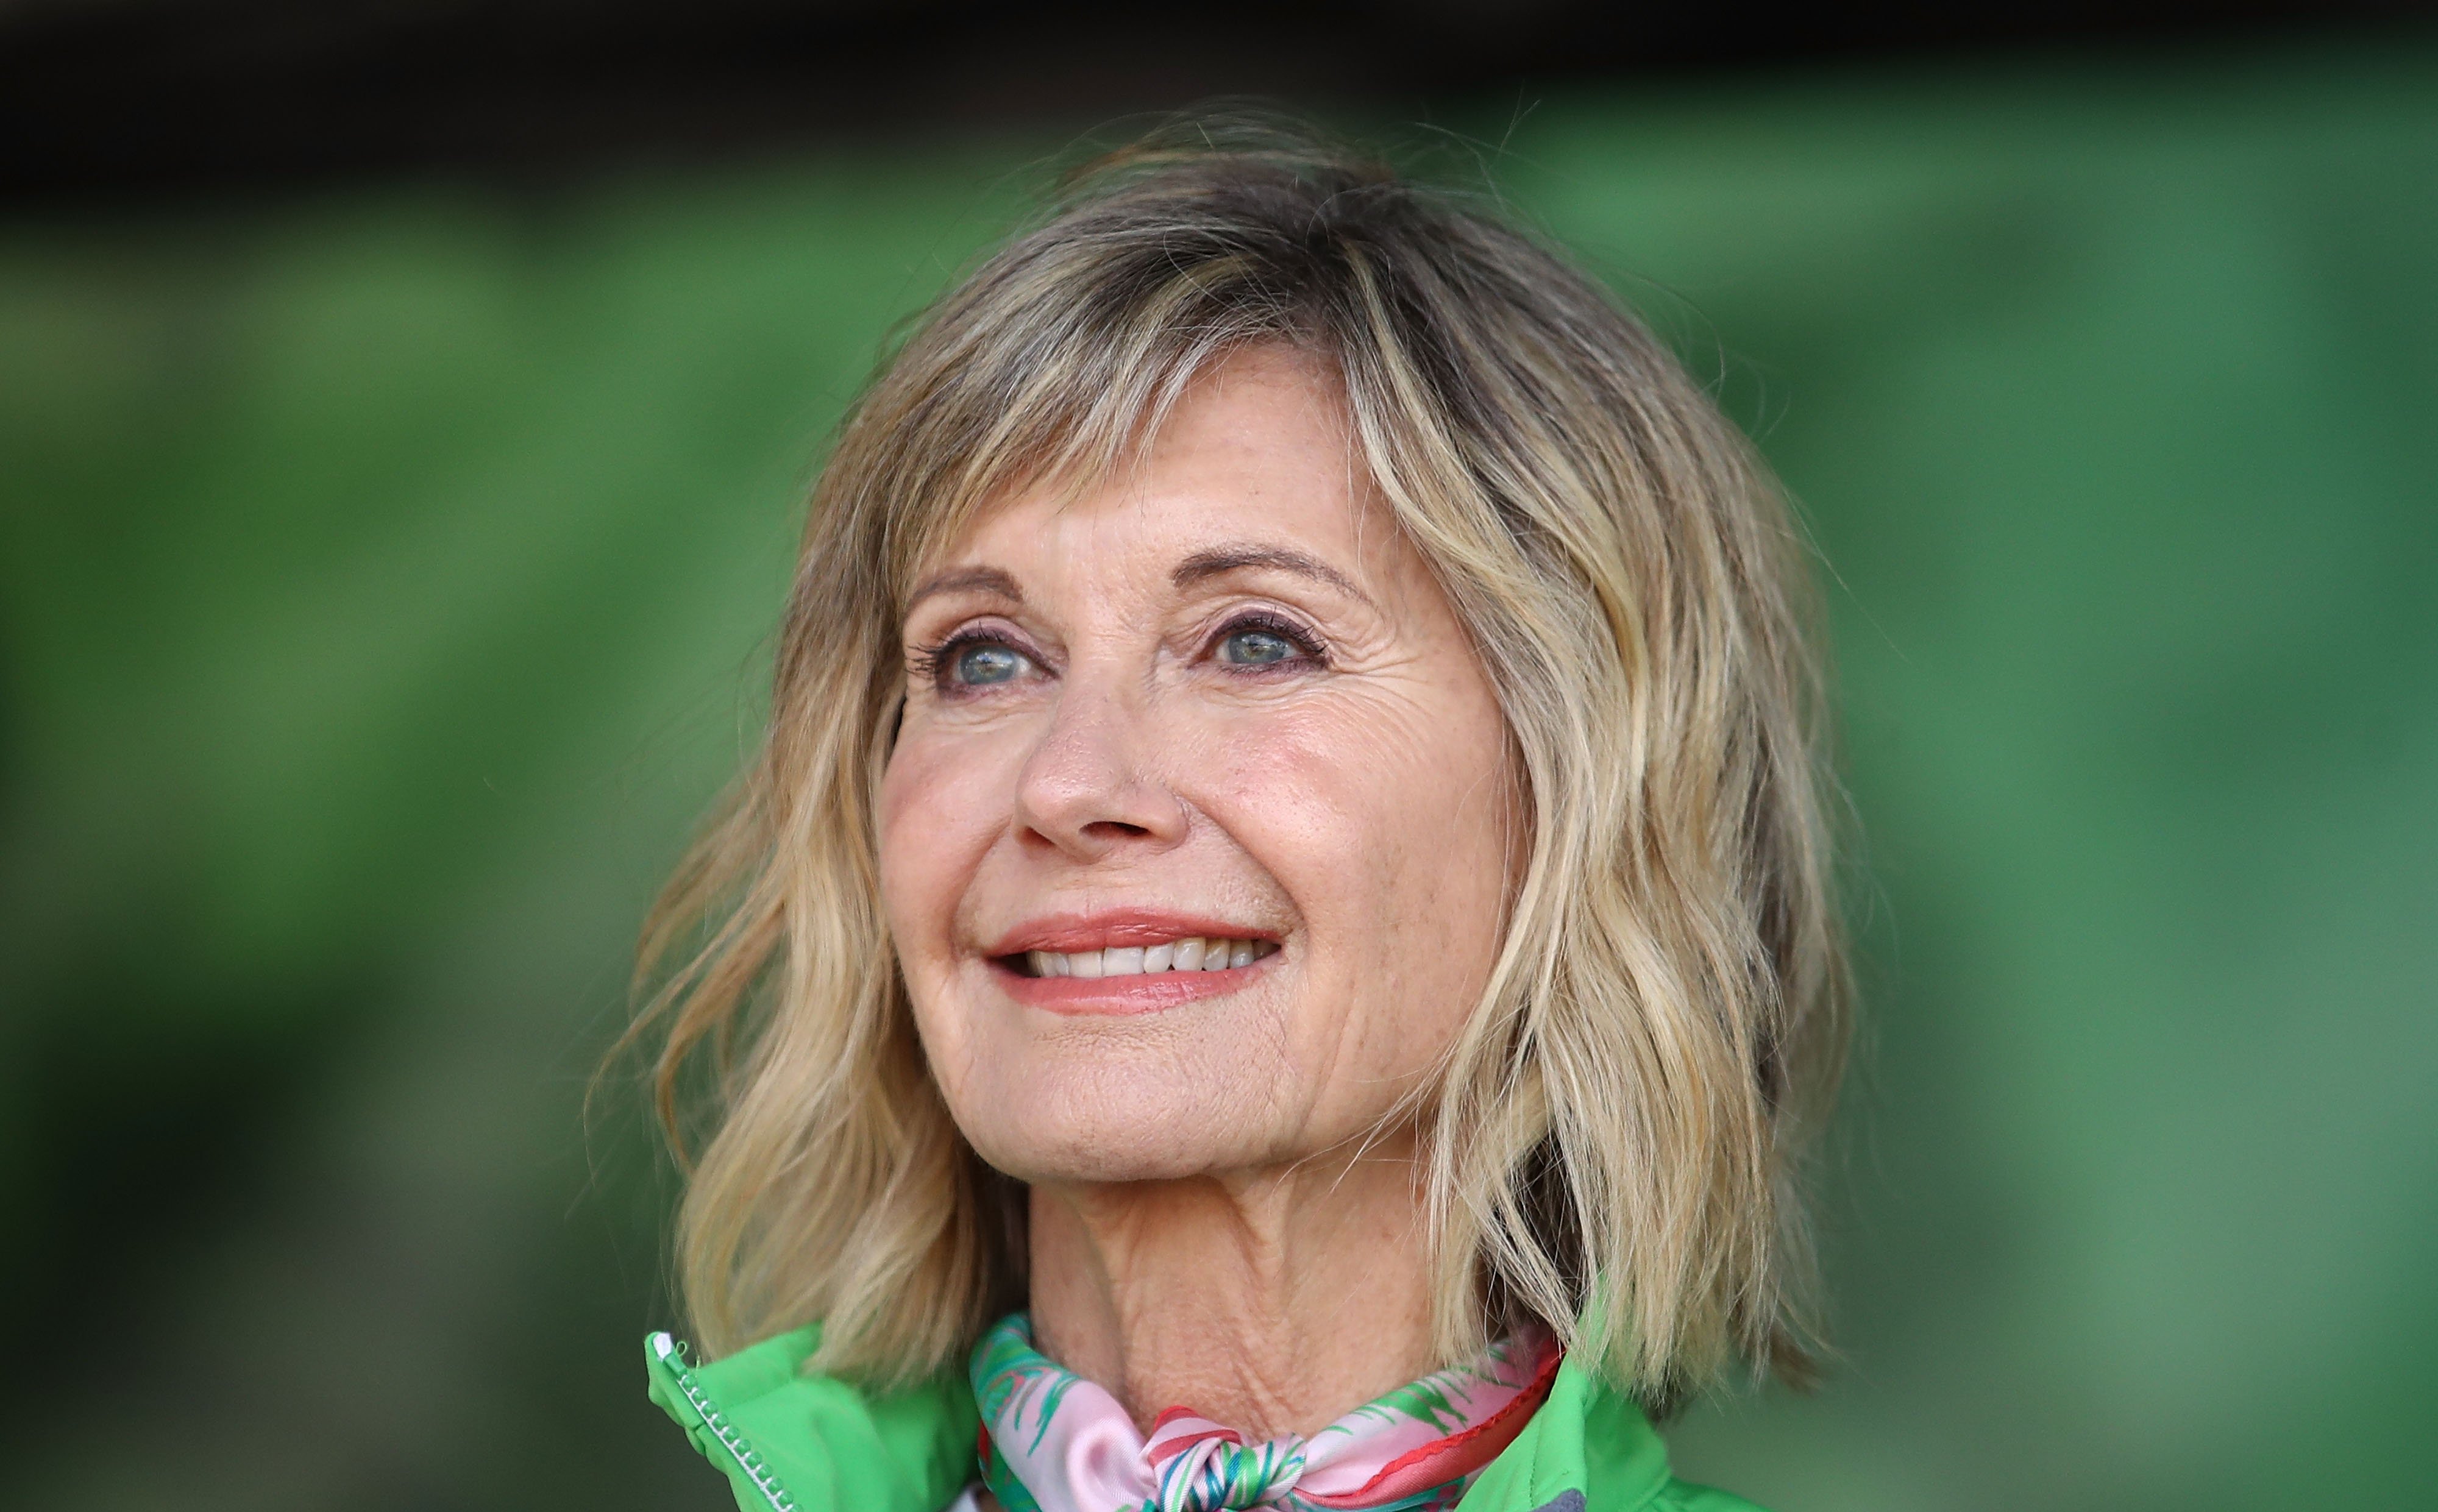 Olivia Newton-John at the annual Wellness Walk and Research Runon September 16, 2018 in Melbourne, Australia | Photo: Getty Images 